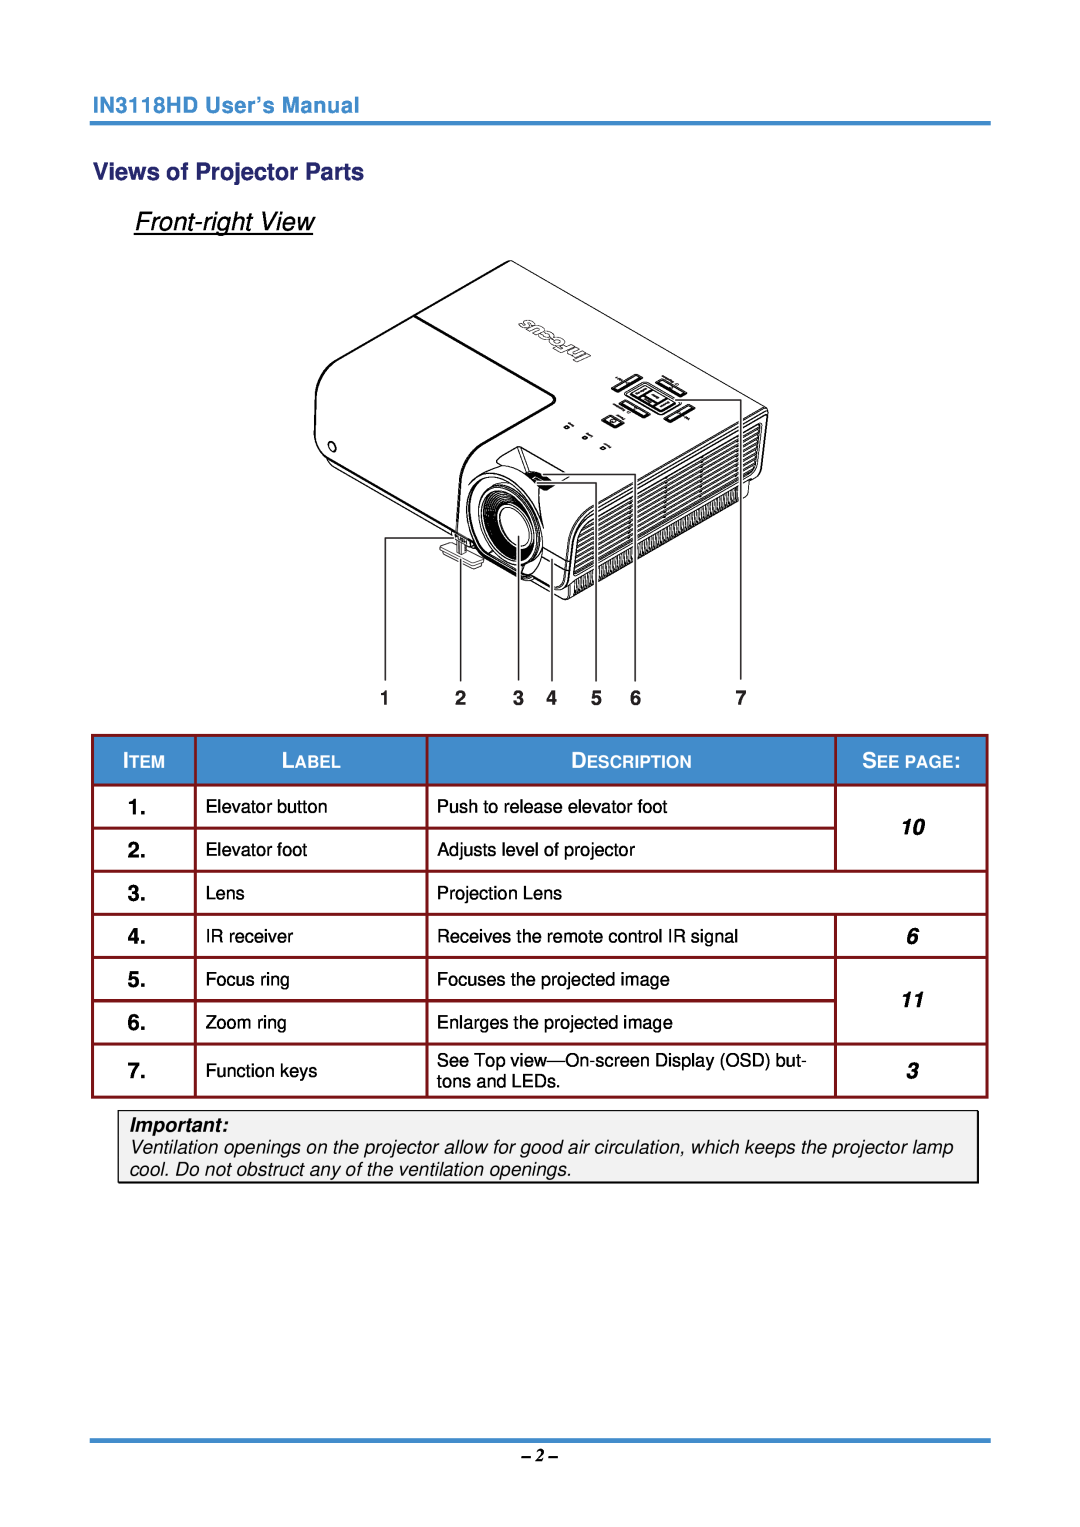 InFocus manual Front-right View, Views of Projector Parts, IN3118HD User’s Manual, Label, Description, See Page 